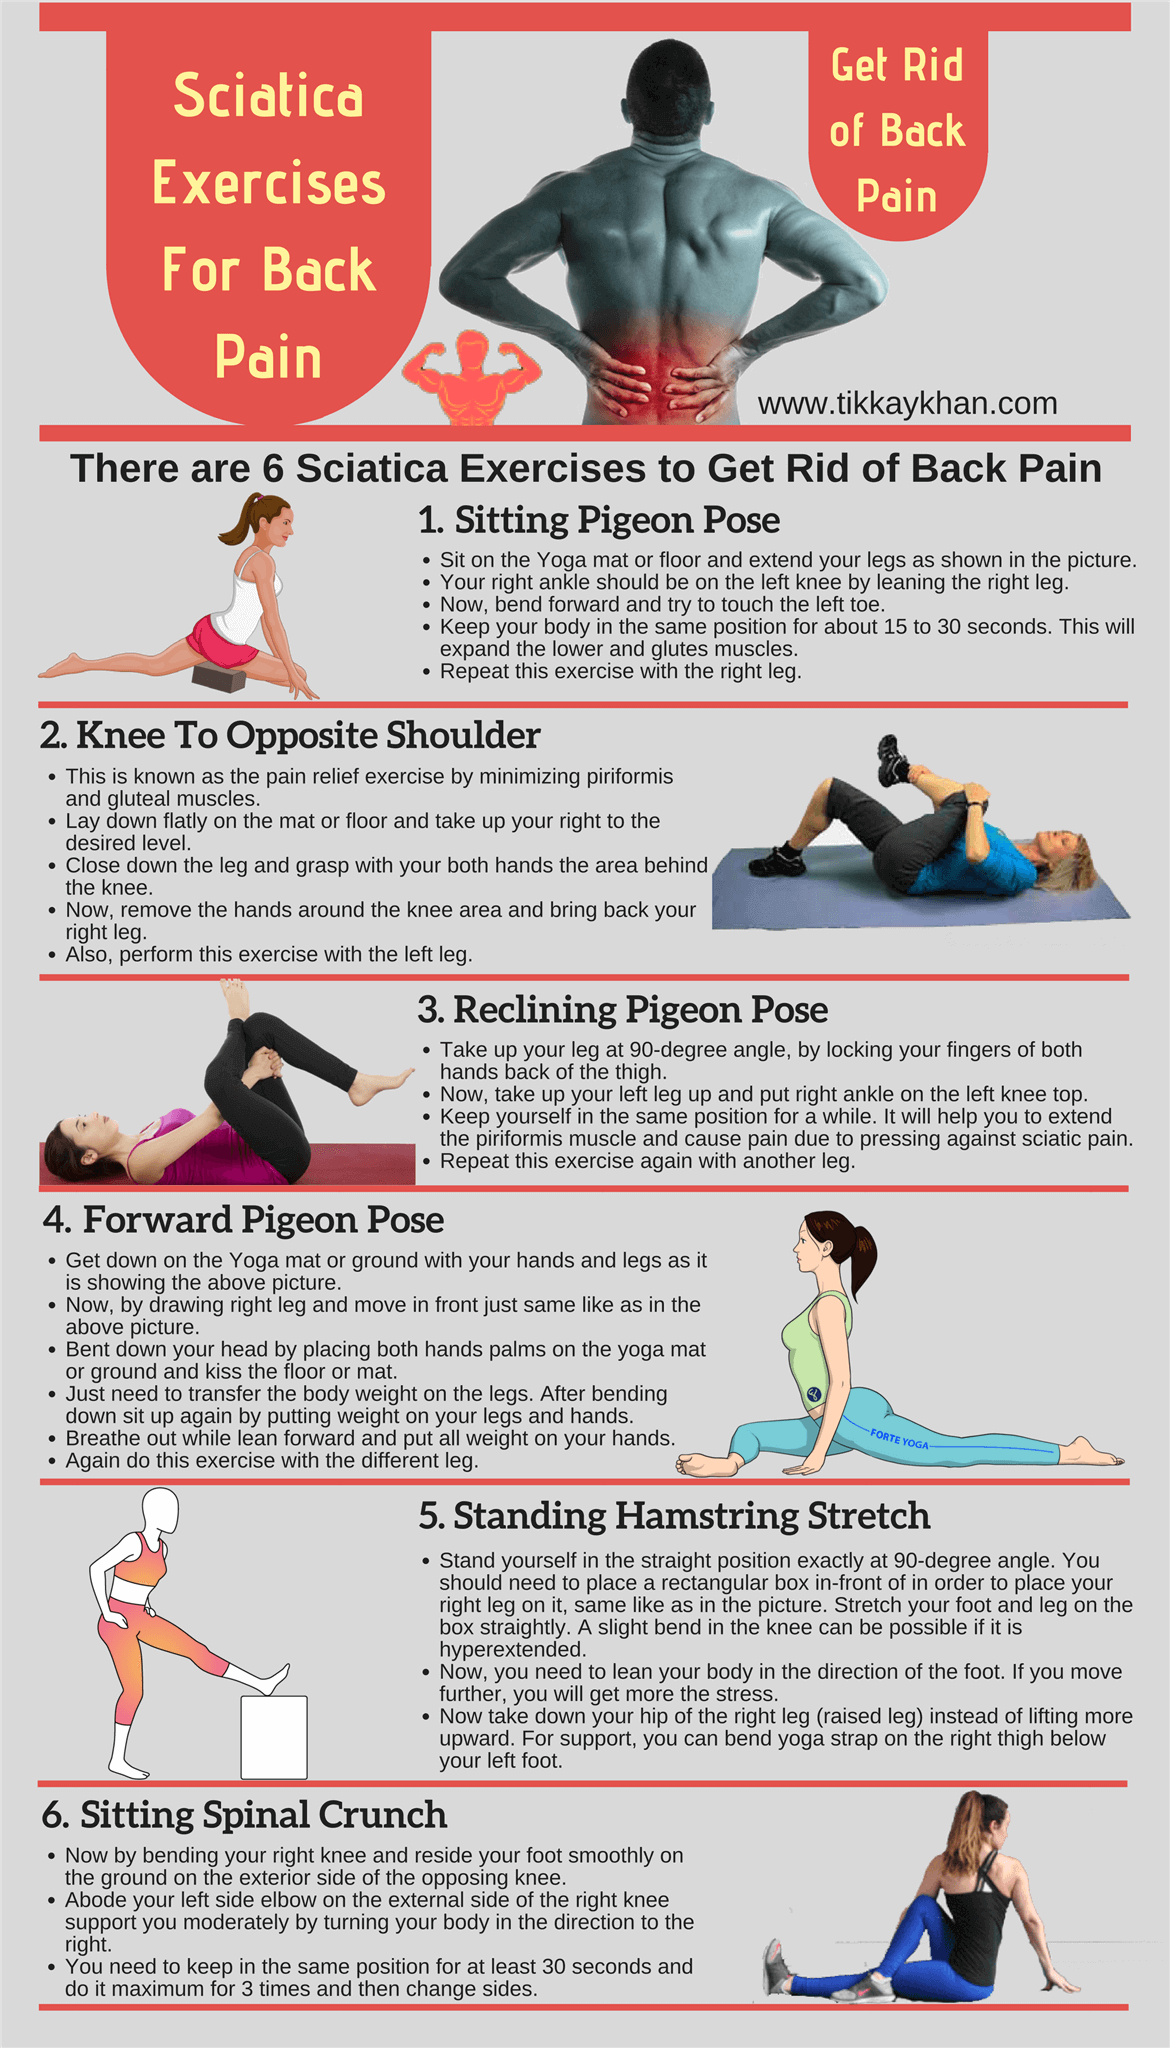 Sciatica Exercises For Back Pain